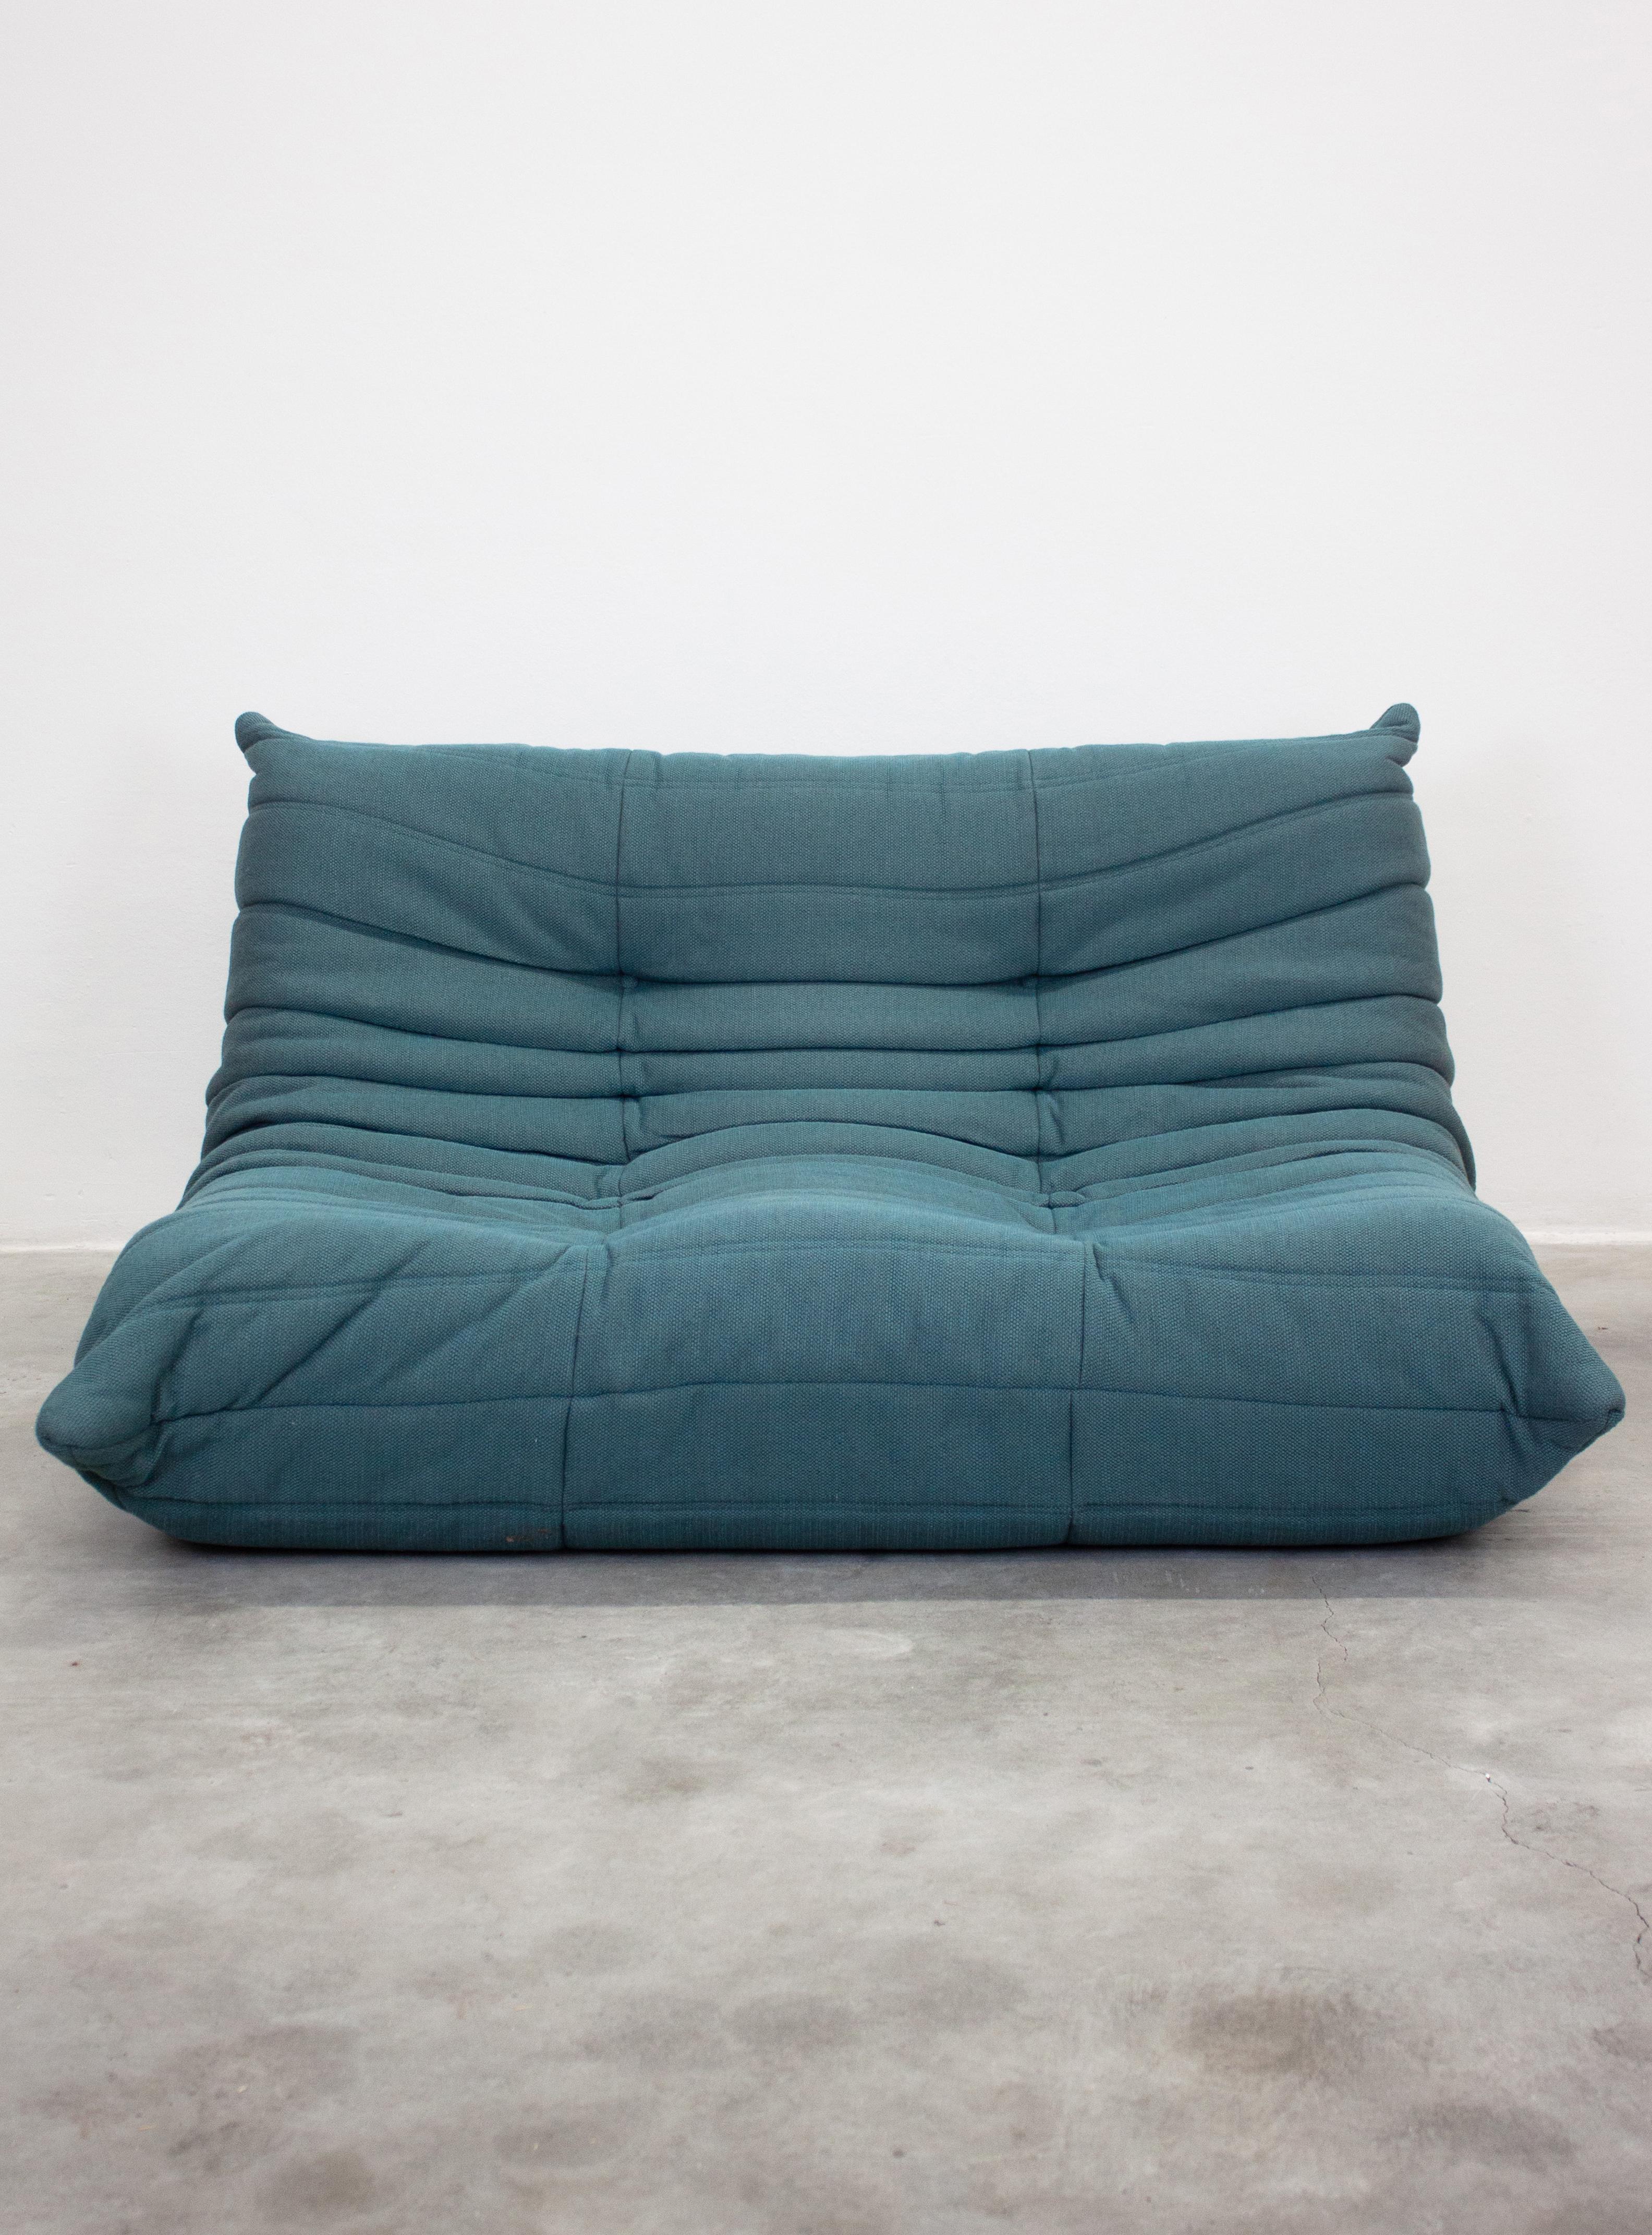 20th Century Ligne Roset Togo 2 Seater Sofa by Michel Ducaroy 'Teal Green'